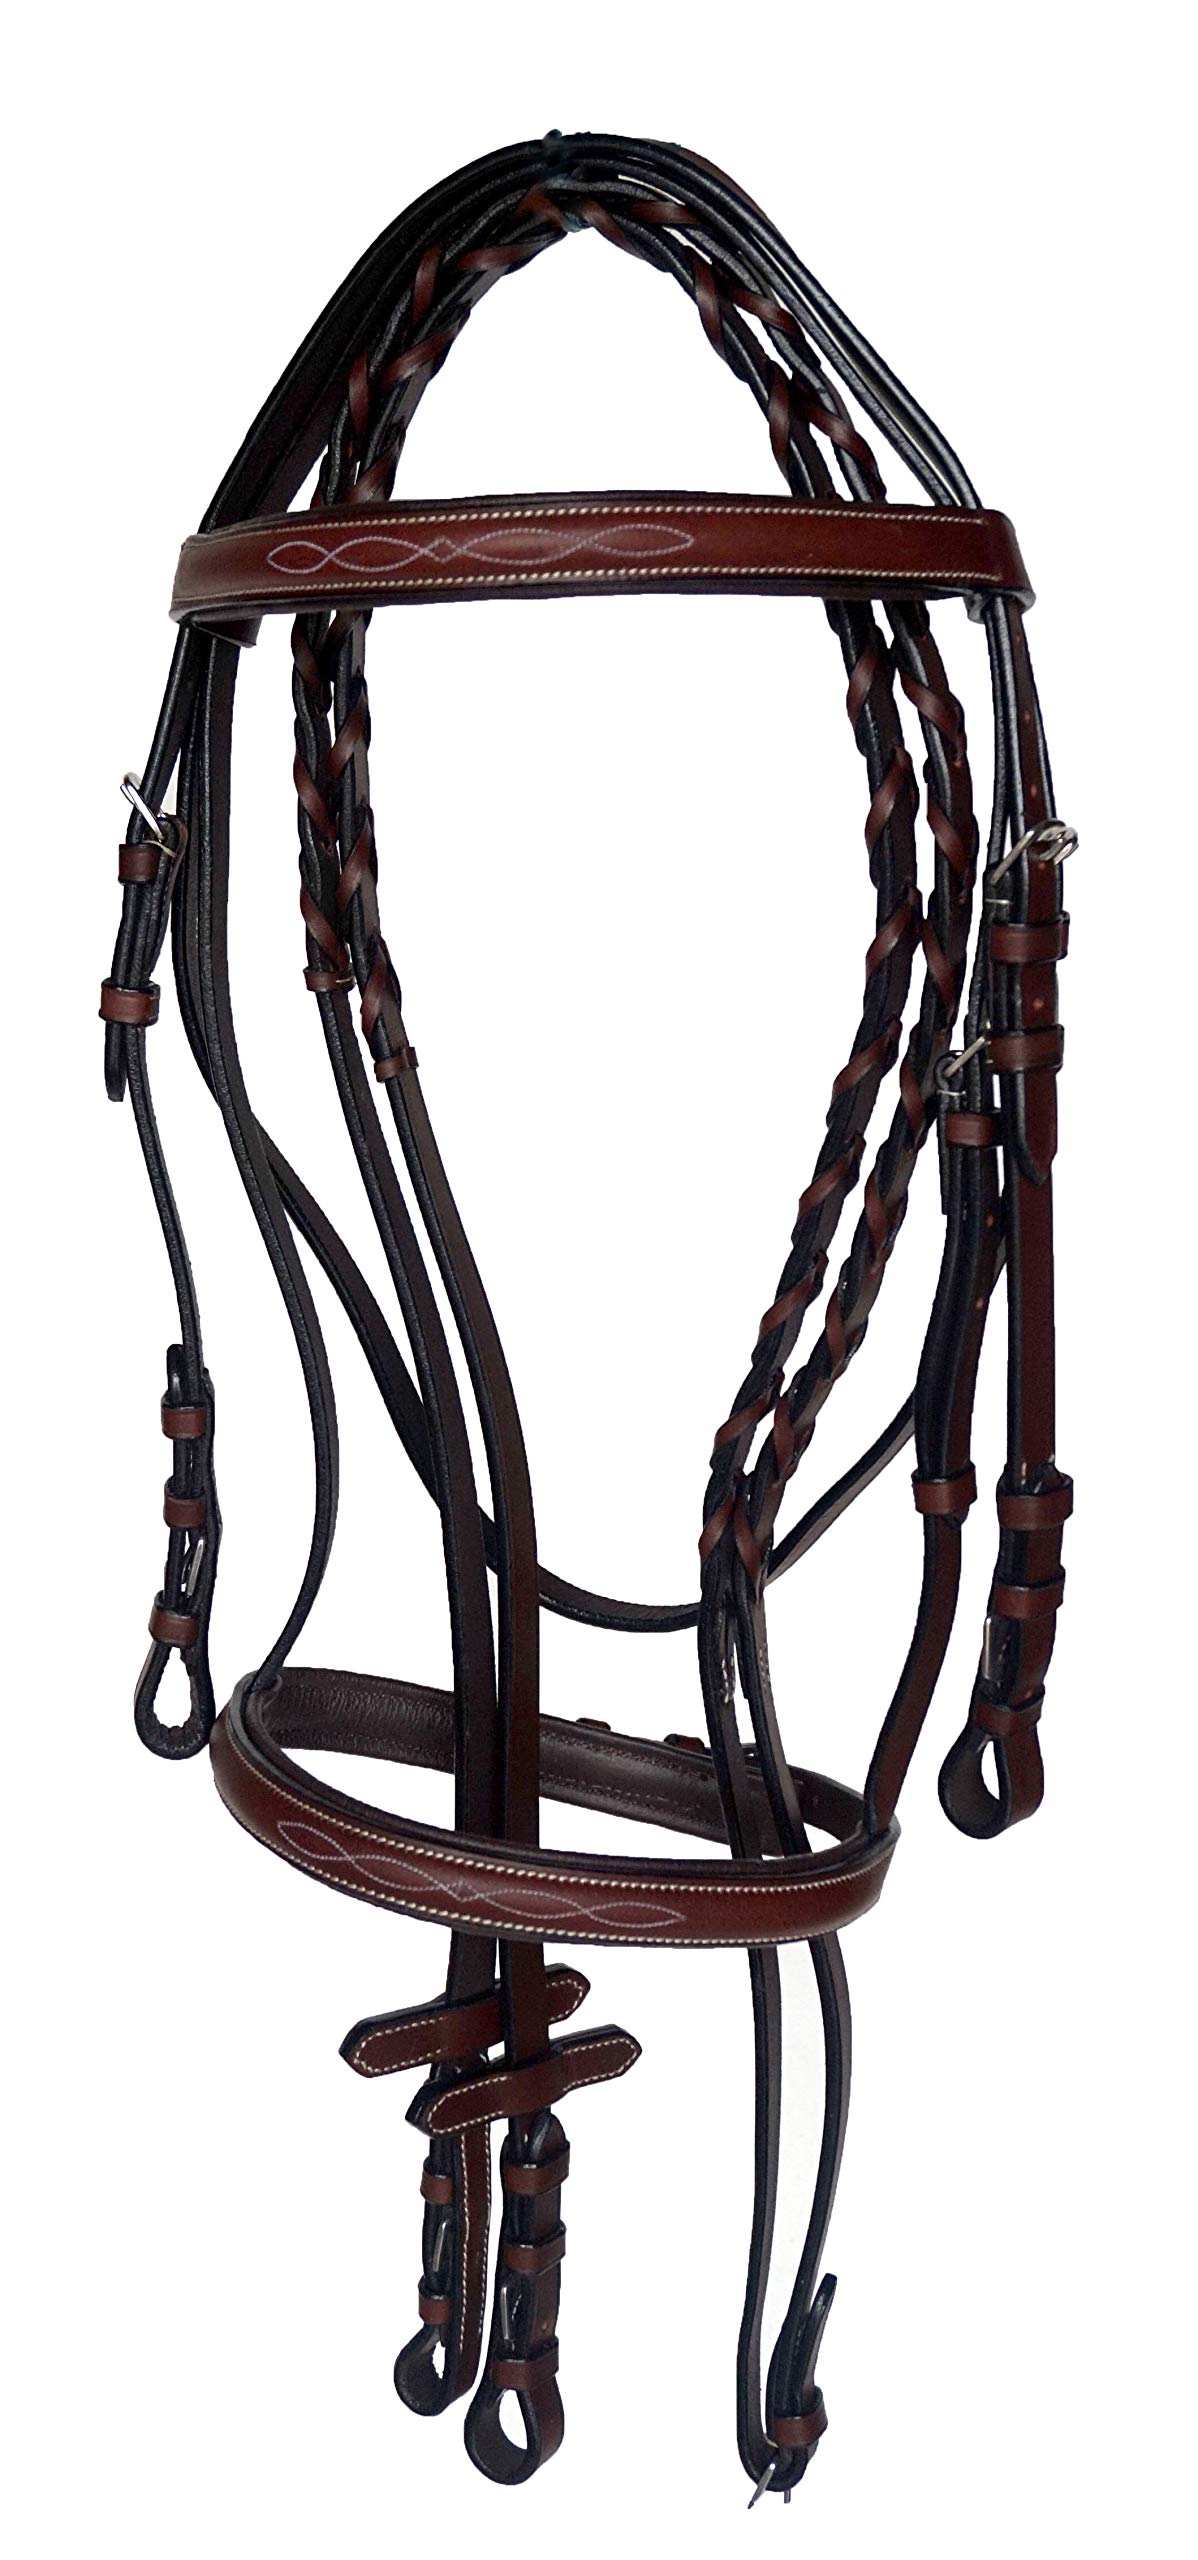 Equitem English Black Padded Leather Bridle with Web Reins 